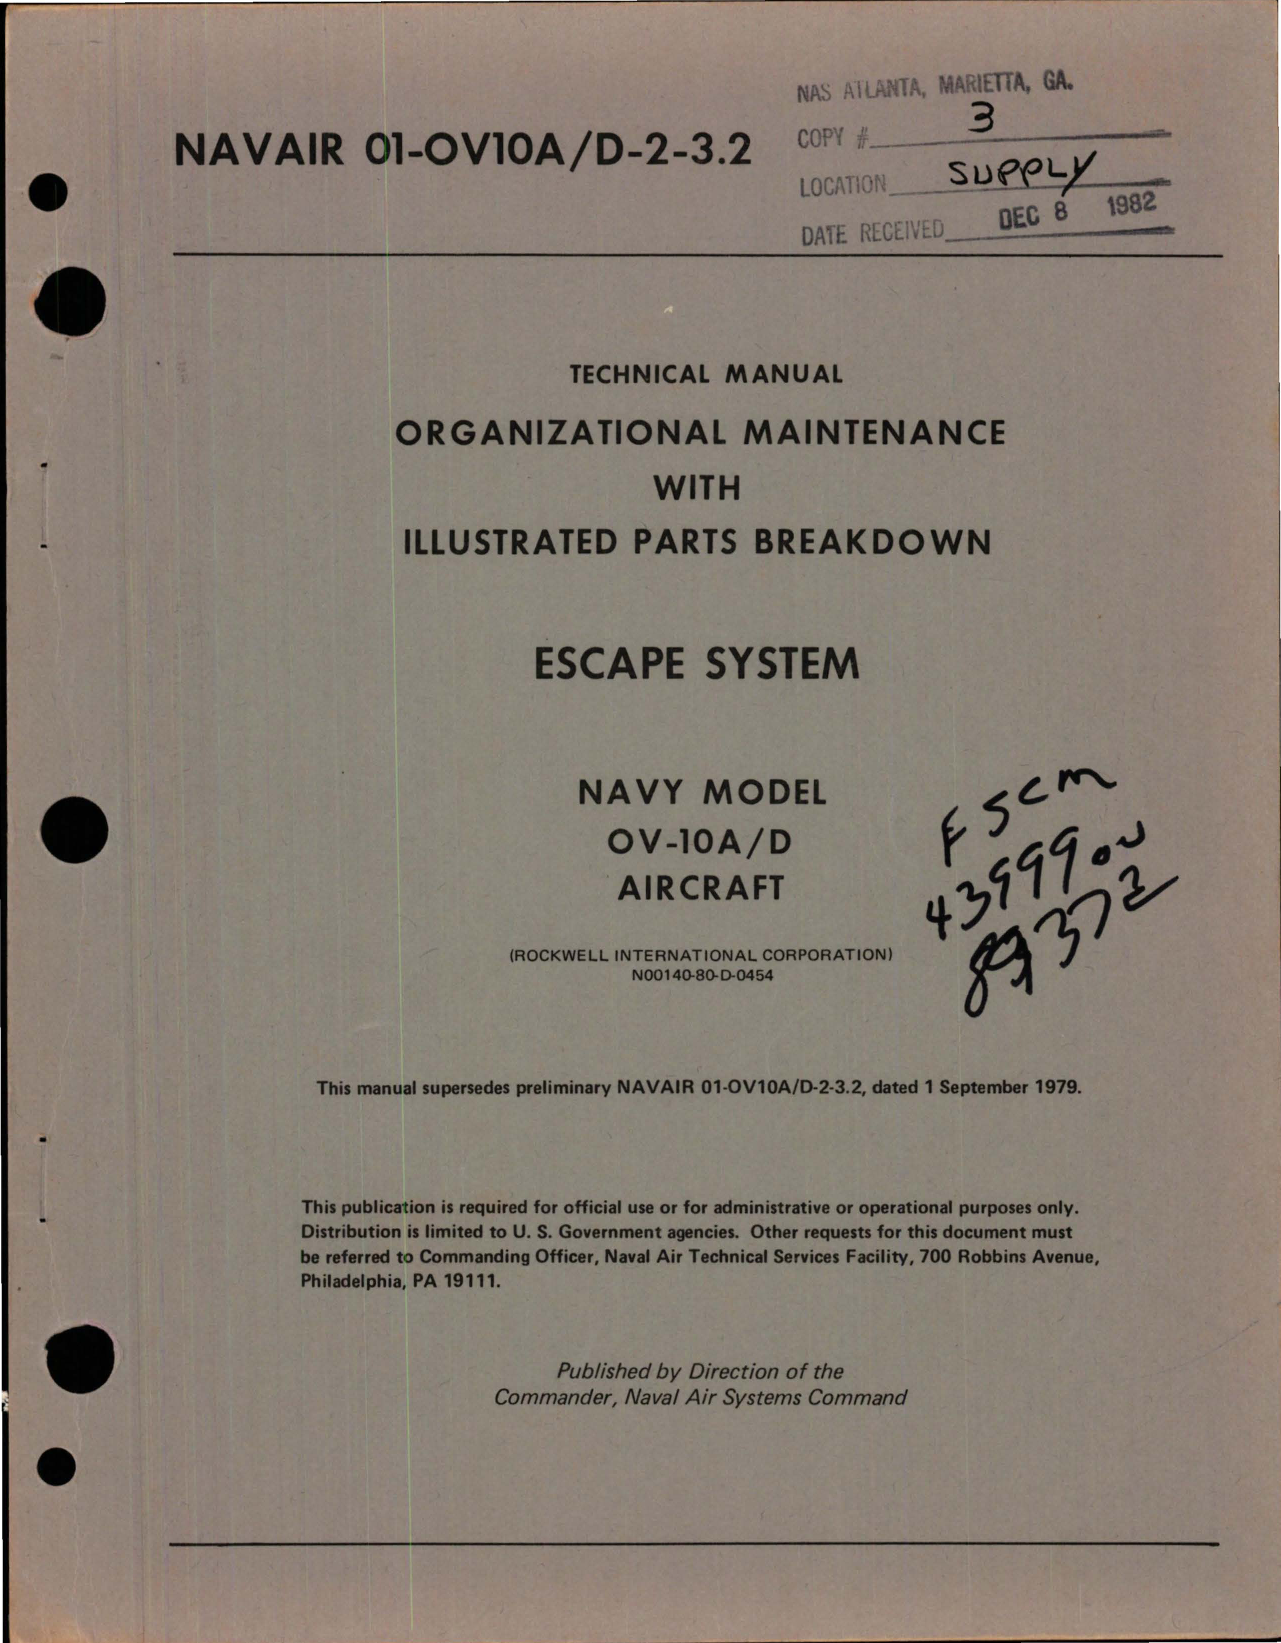 Sample page 1 from AirCorps Library document: Organizational Maintenance with Illustrated Parts for Escape System for OV-10A/D